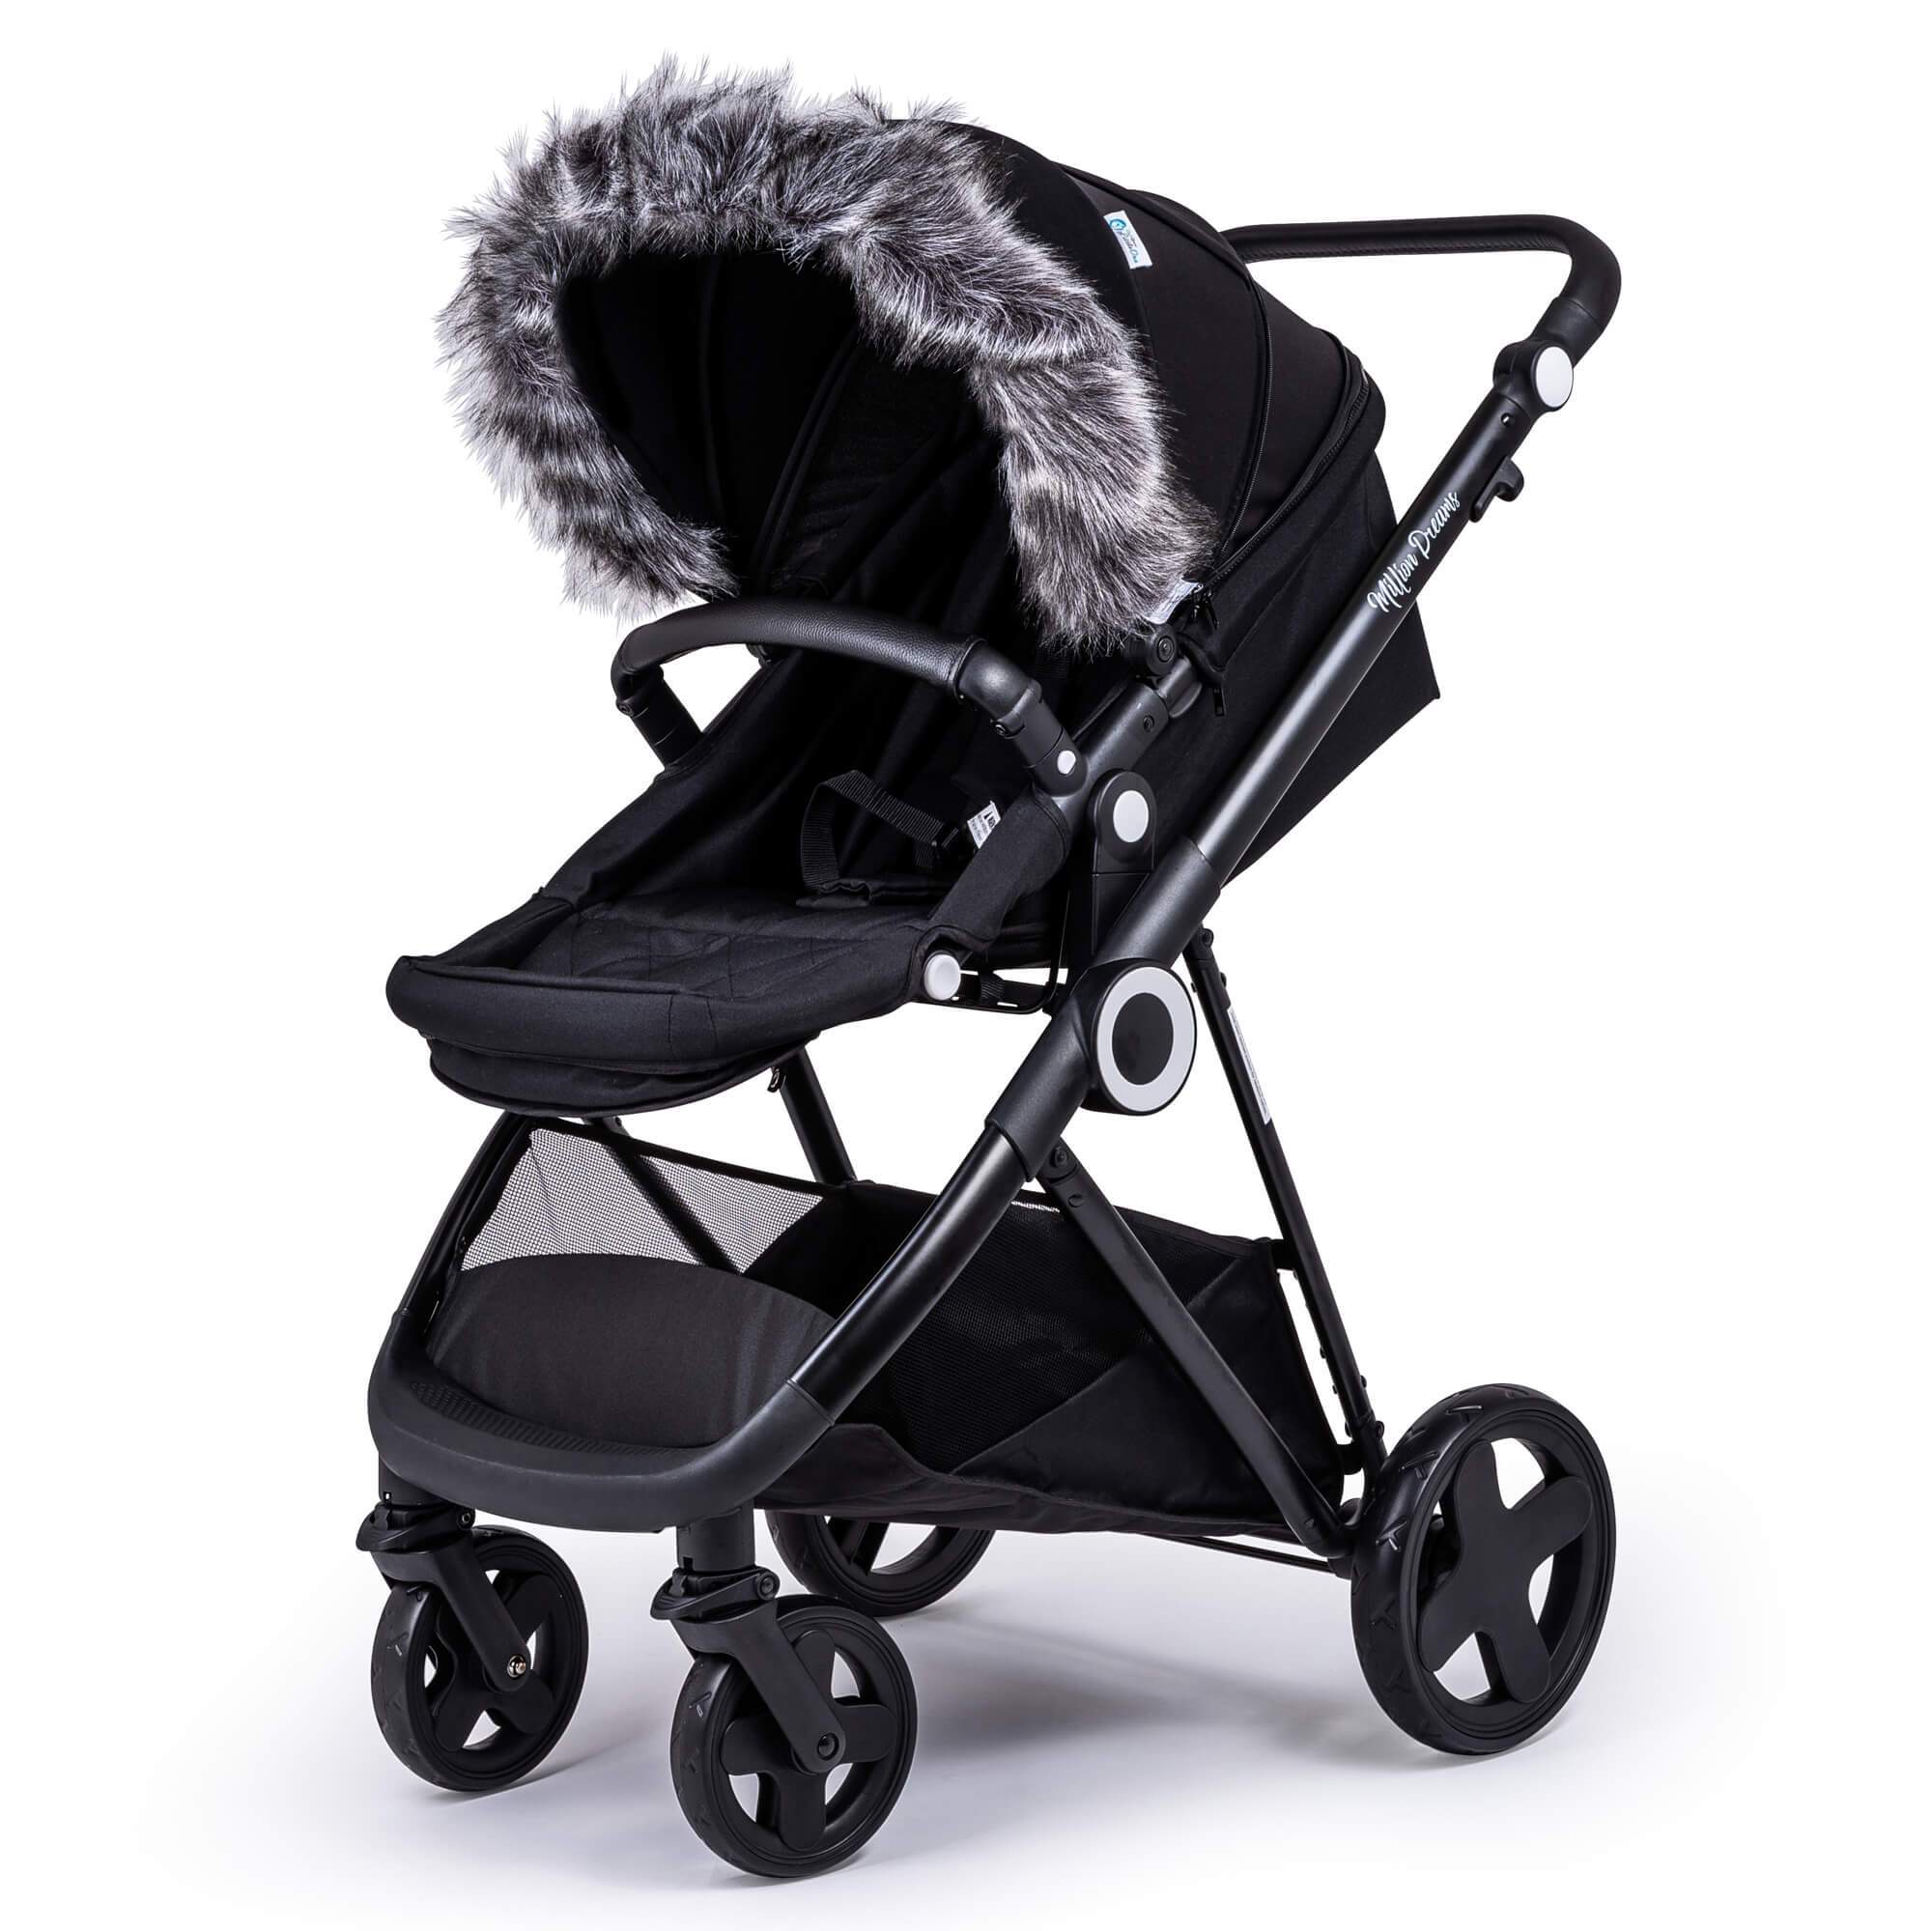 Pram Fur Hood Trim Attachment for Pushchair Compatible with Britax - Dark Grey / Fits All Models | For Your Little One